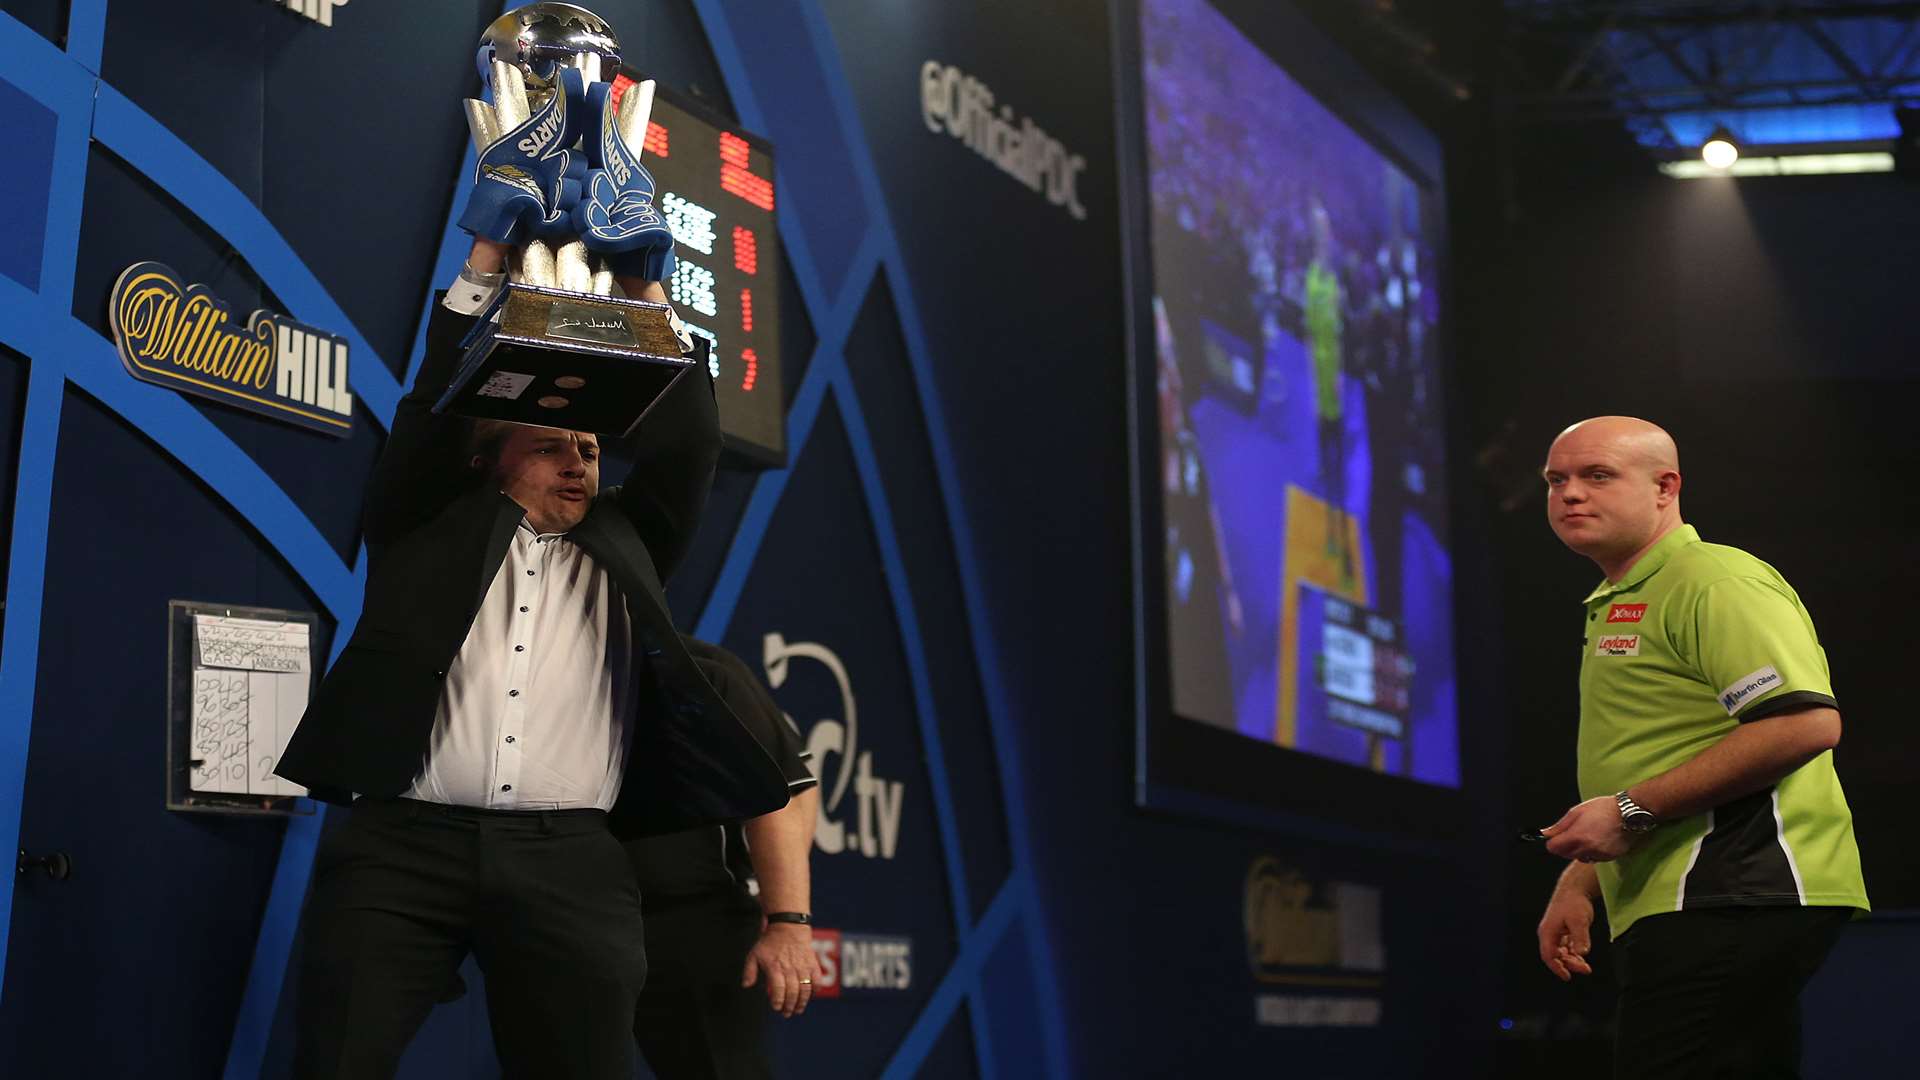 Lee Marshall holds the Sid Waddell trophy aloft in front of the eventual winner Michael van Gerwen. Credit: Steve Paston/PA Wire.